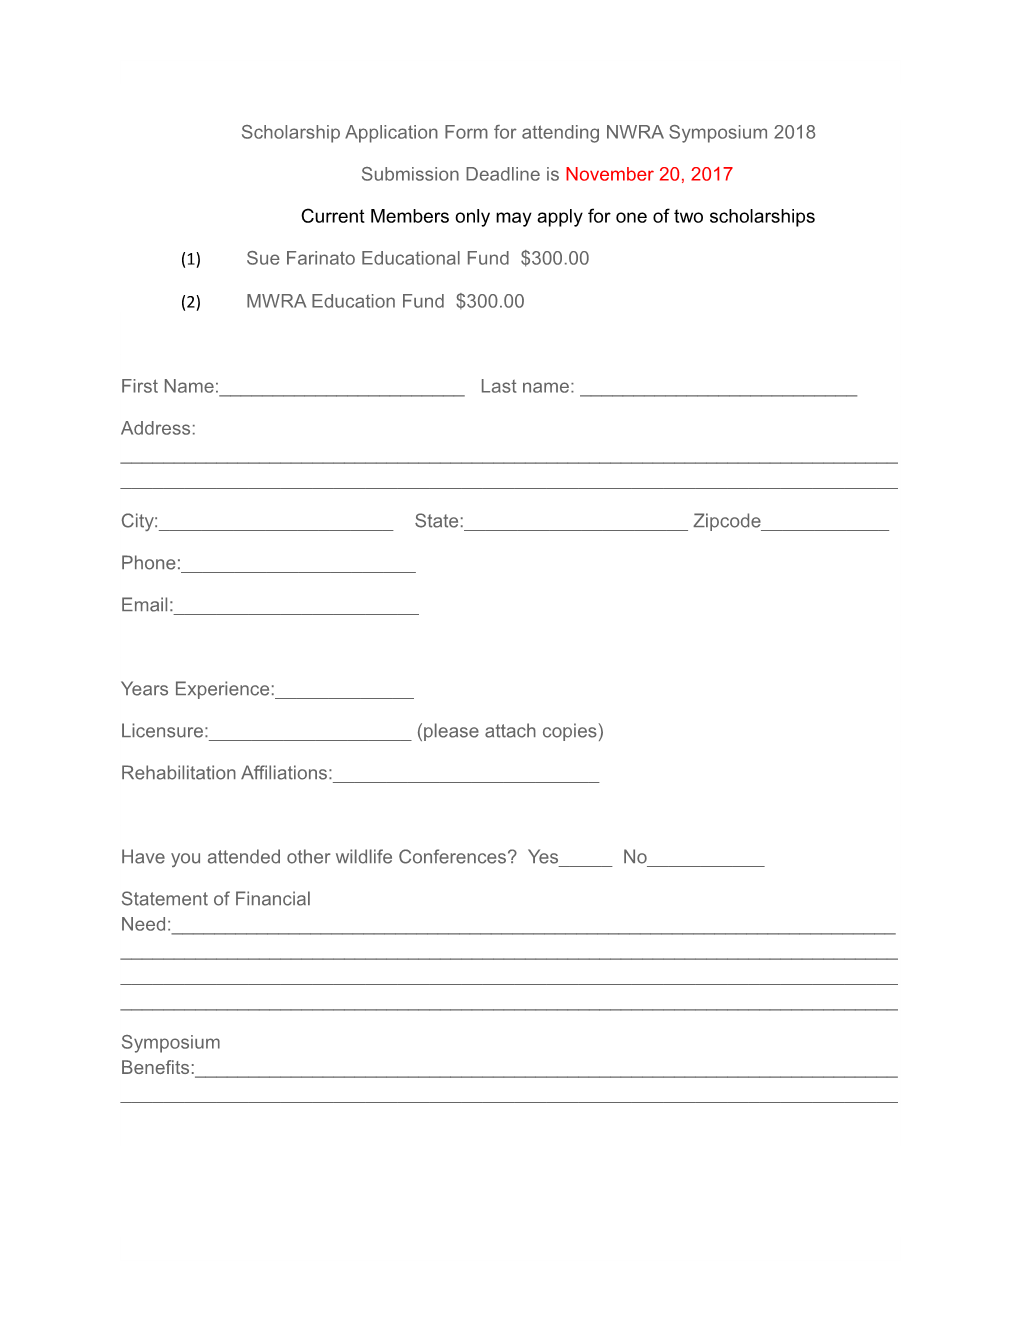 Scholarship Application Form for Attending NWRA Symposium 2018